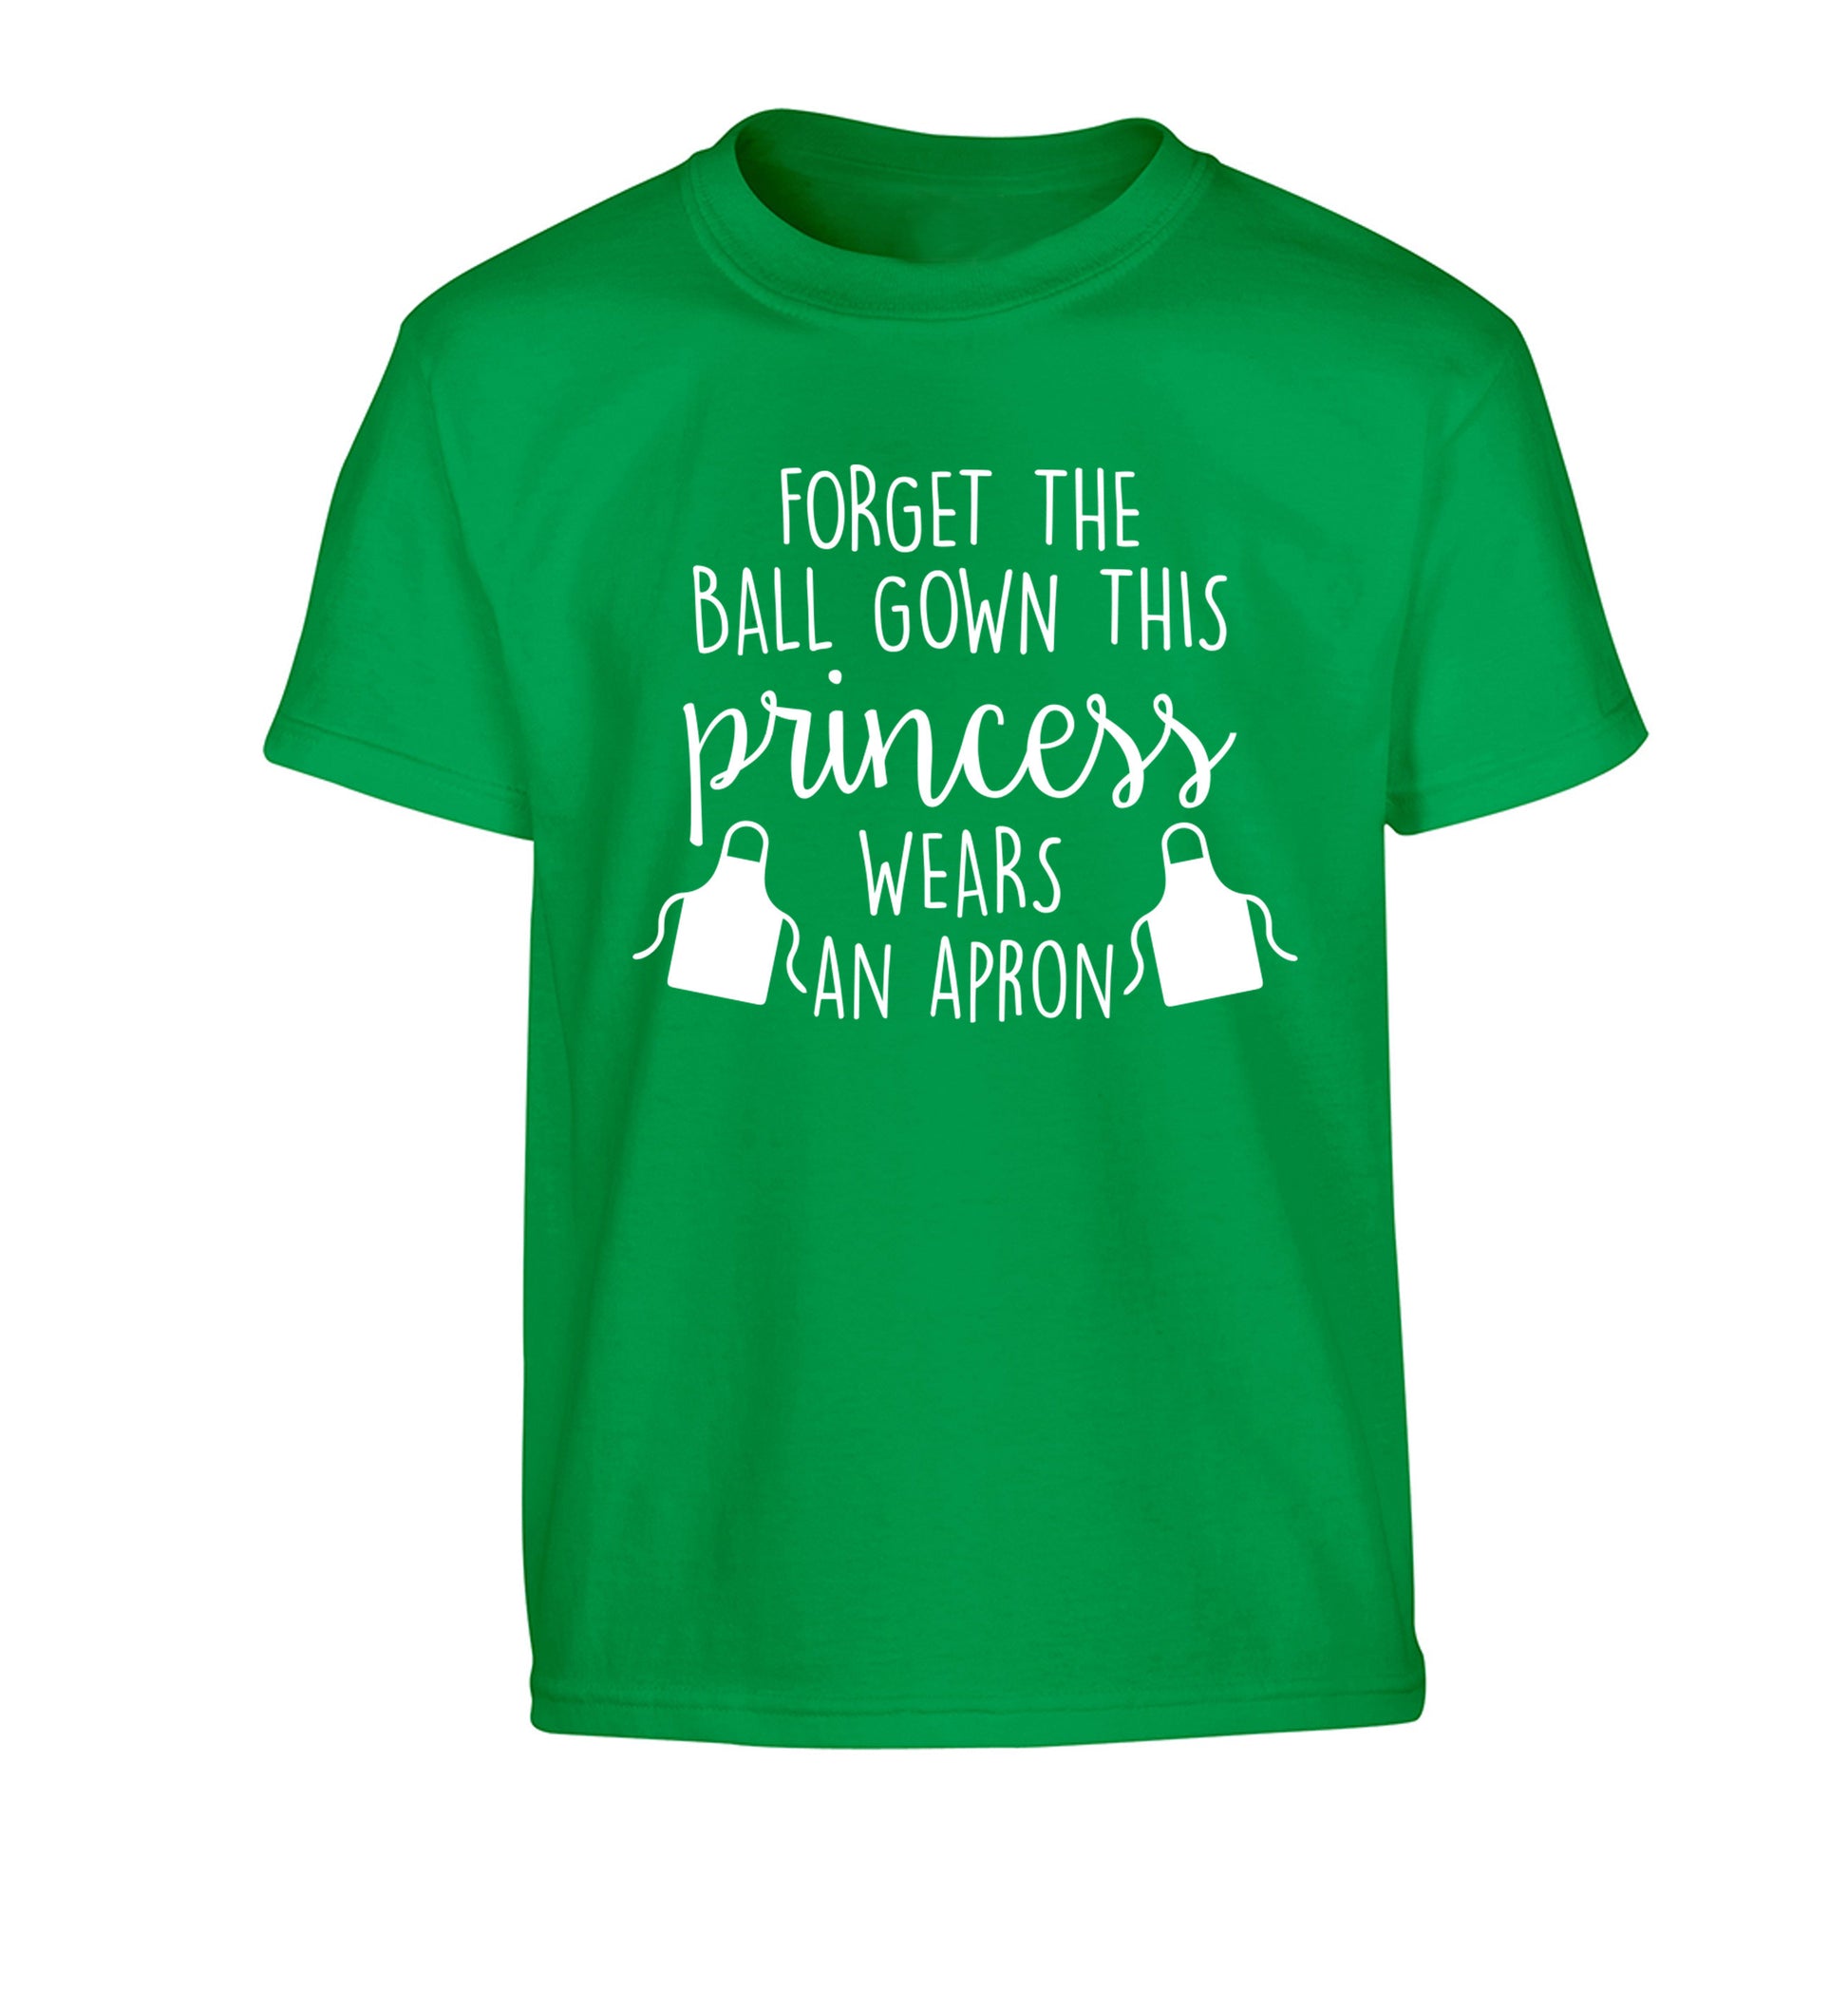 Forget the ball gown this princess wears an apron Children's green Tshirt 12-14 Years